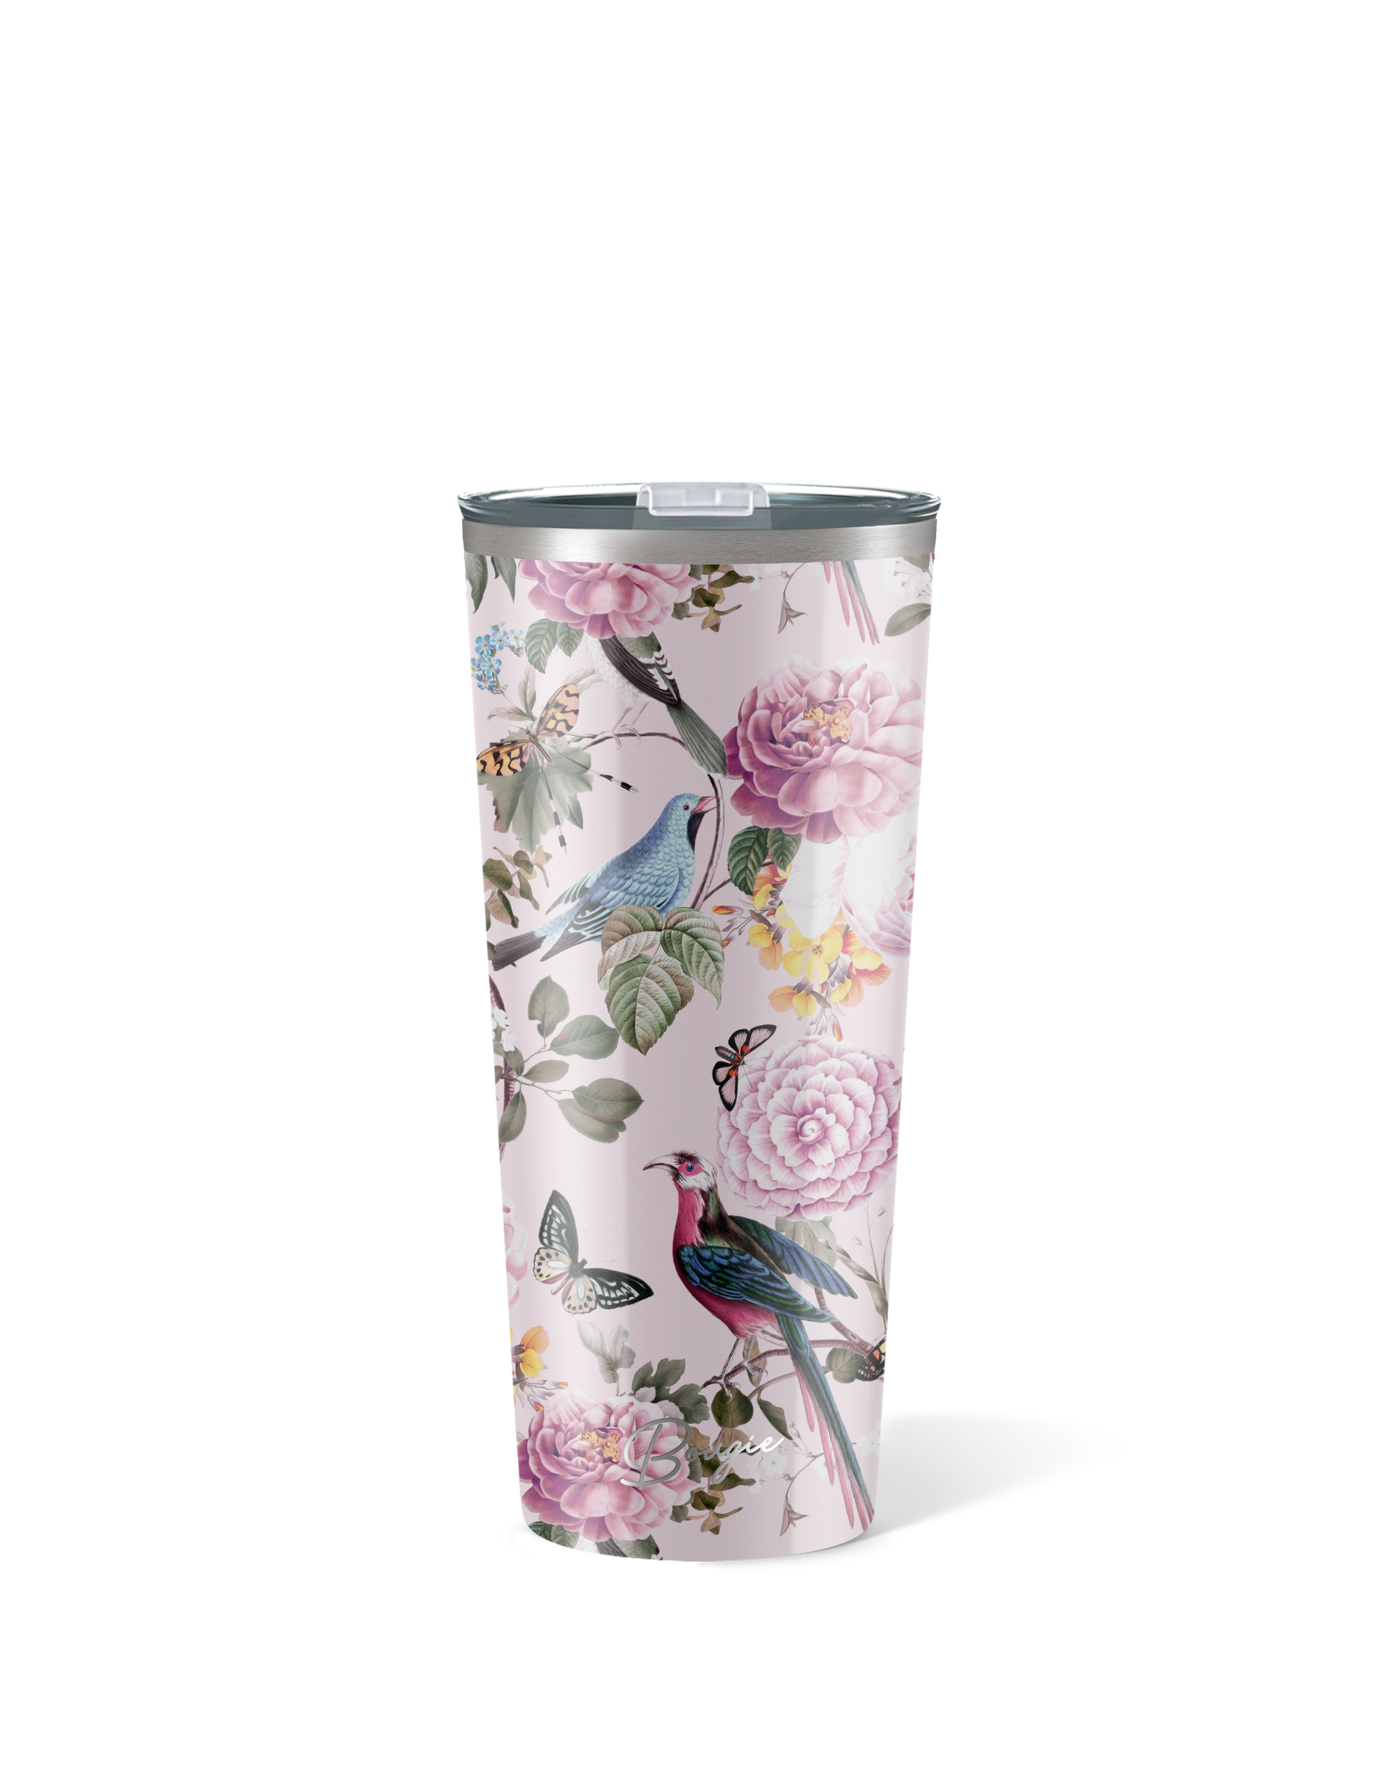 22oz. Insulated Tumbler | Primavera bird, butterly and roses